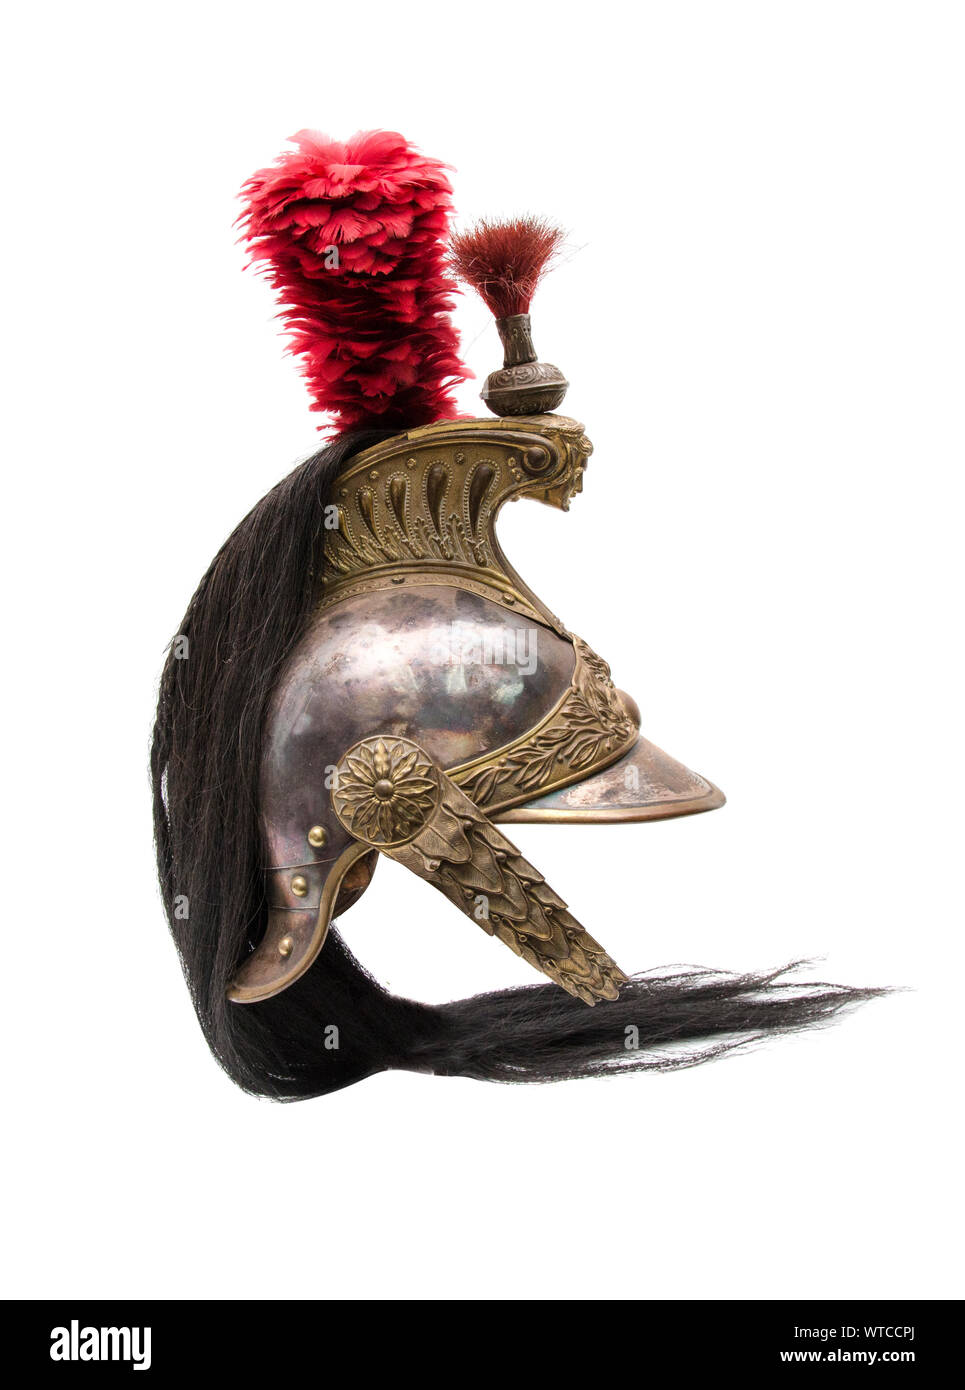 French Cuirassier Helmet of the 19th century. The helmet has a steel skull with brass edging, fittings, and a crest with repoussé decoration, the head Stock Photo